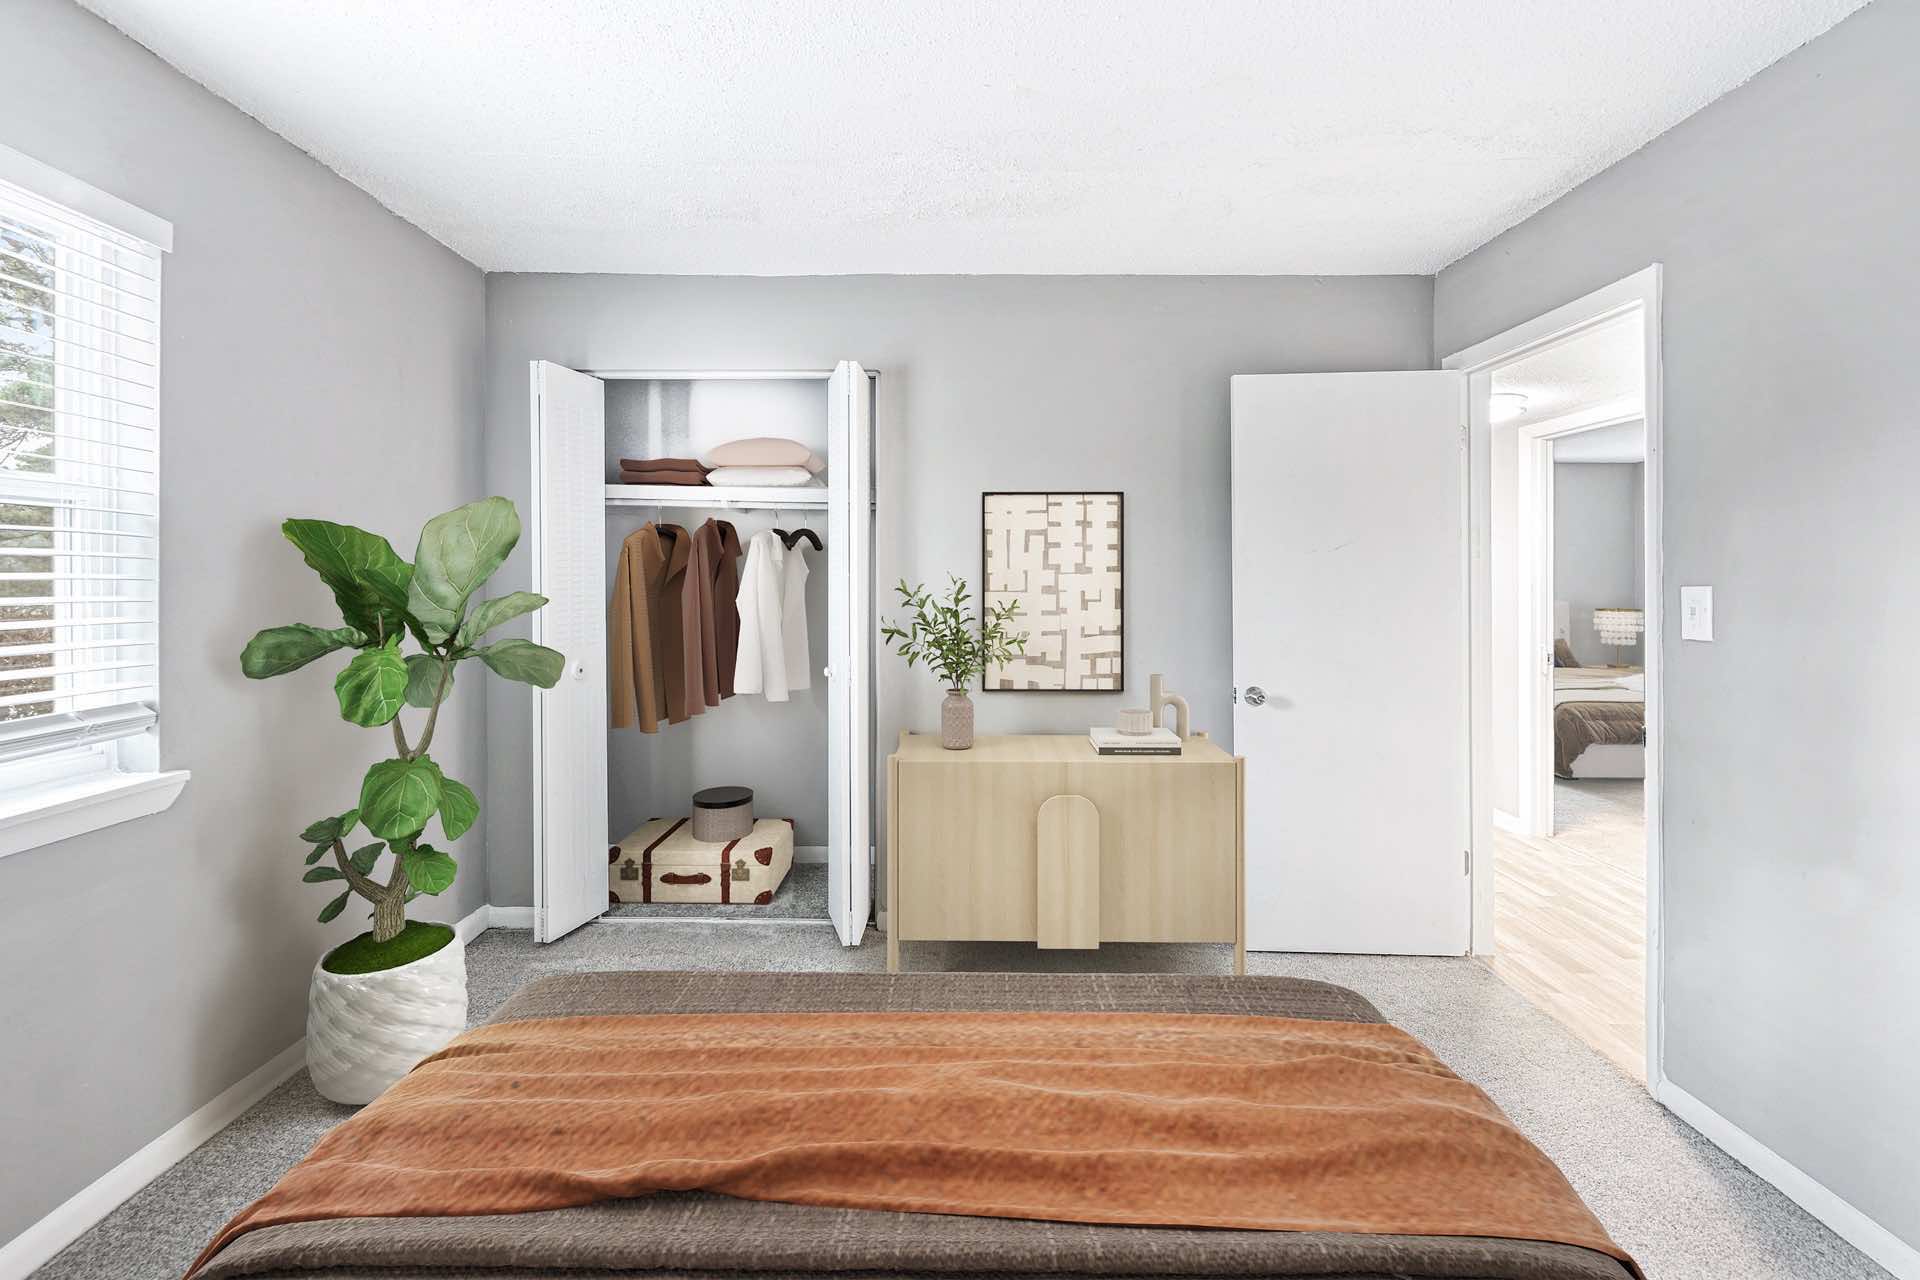 bedroom with natural lighting, plush carpeting, and reach-in closet